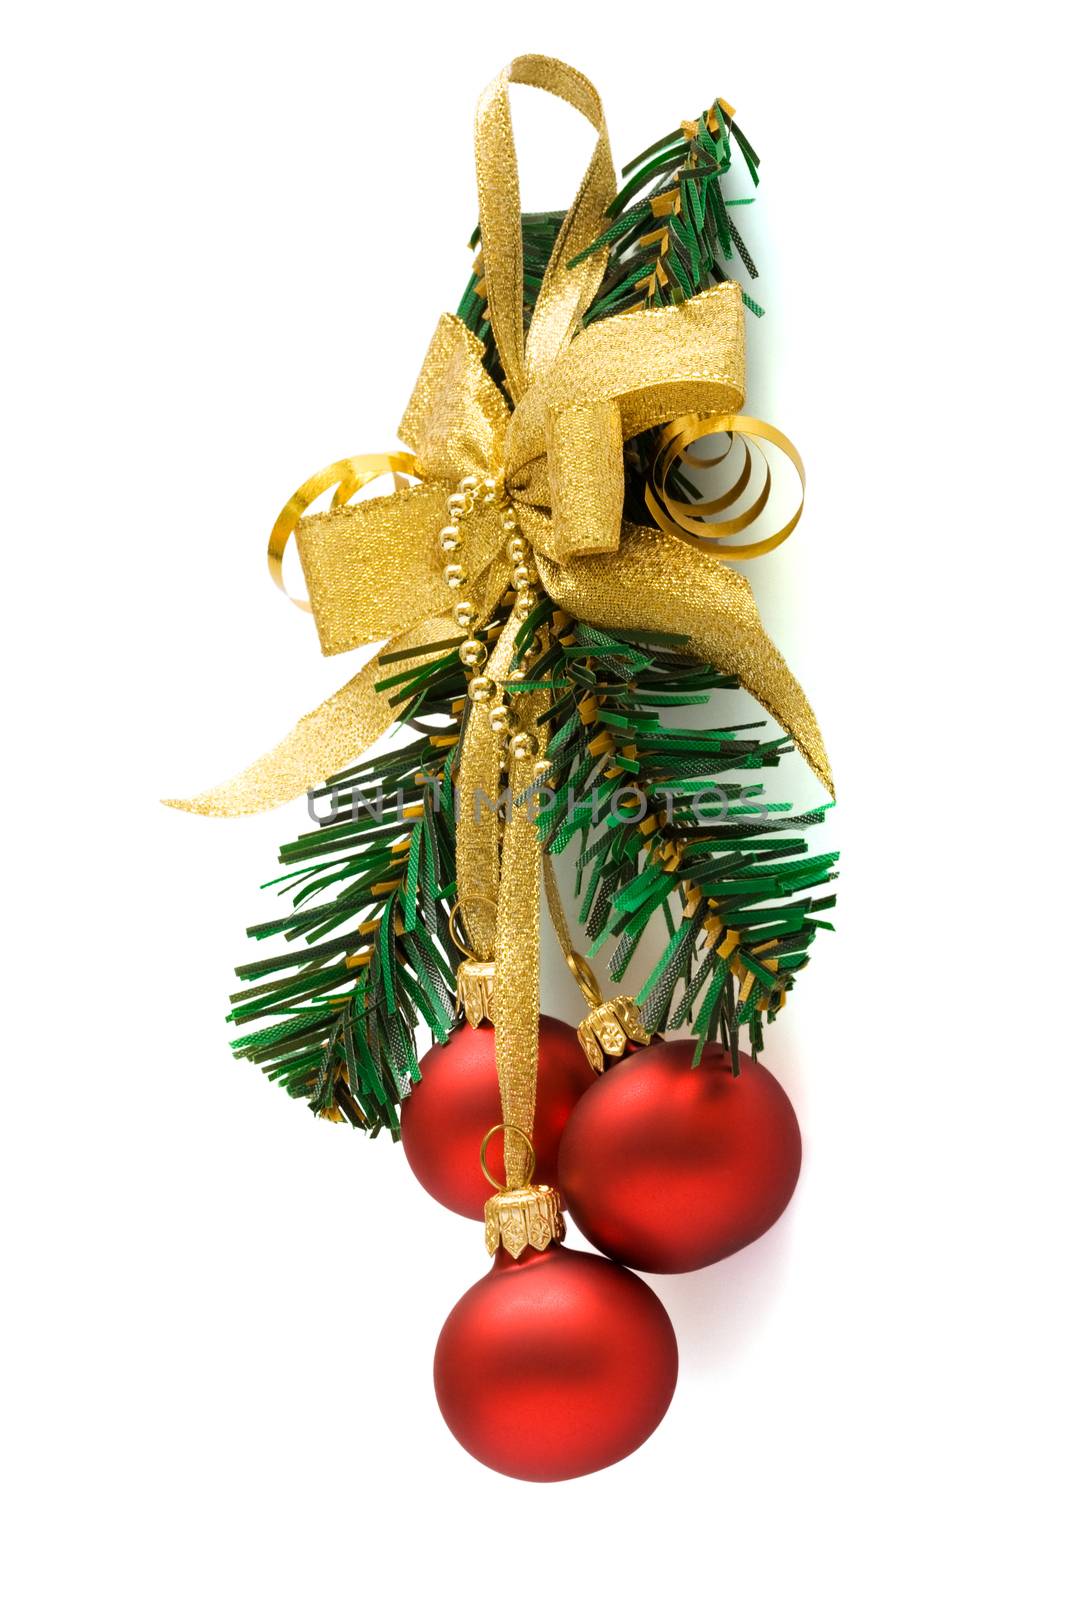 Christmas ornament with ball by terex